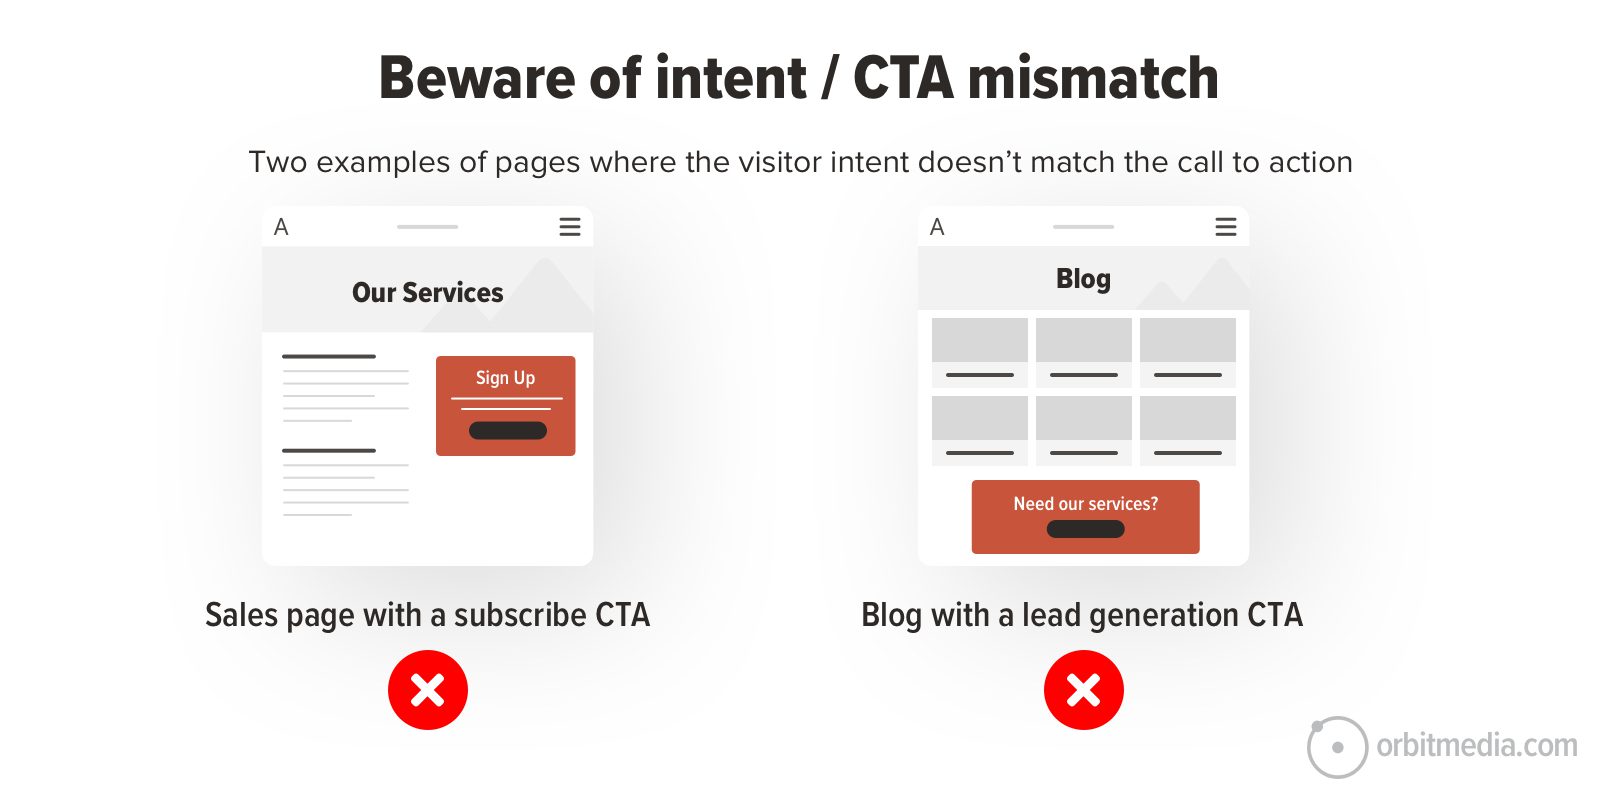 An image illustrating a mismatch between visitor intent and CTA. Left: Sales page with a 'Subscribe' CTA. Right: Blog page with a 'Need our services?' CTA. Both have red X marks indicating incorrect pairings.